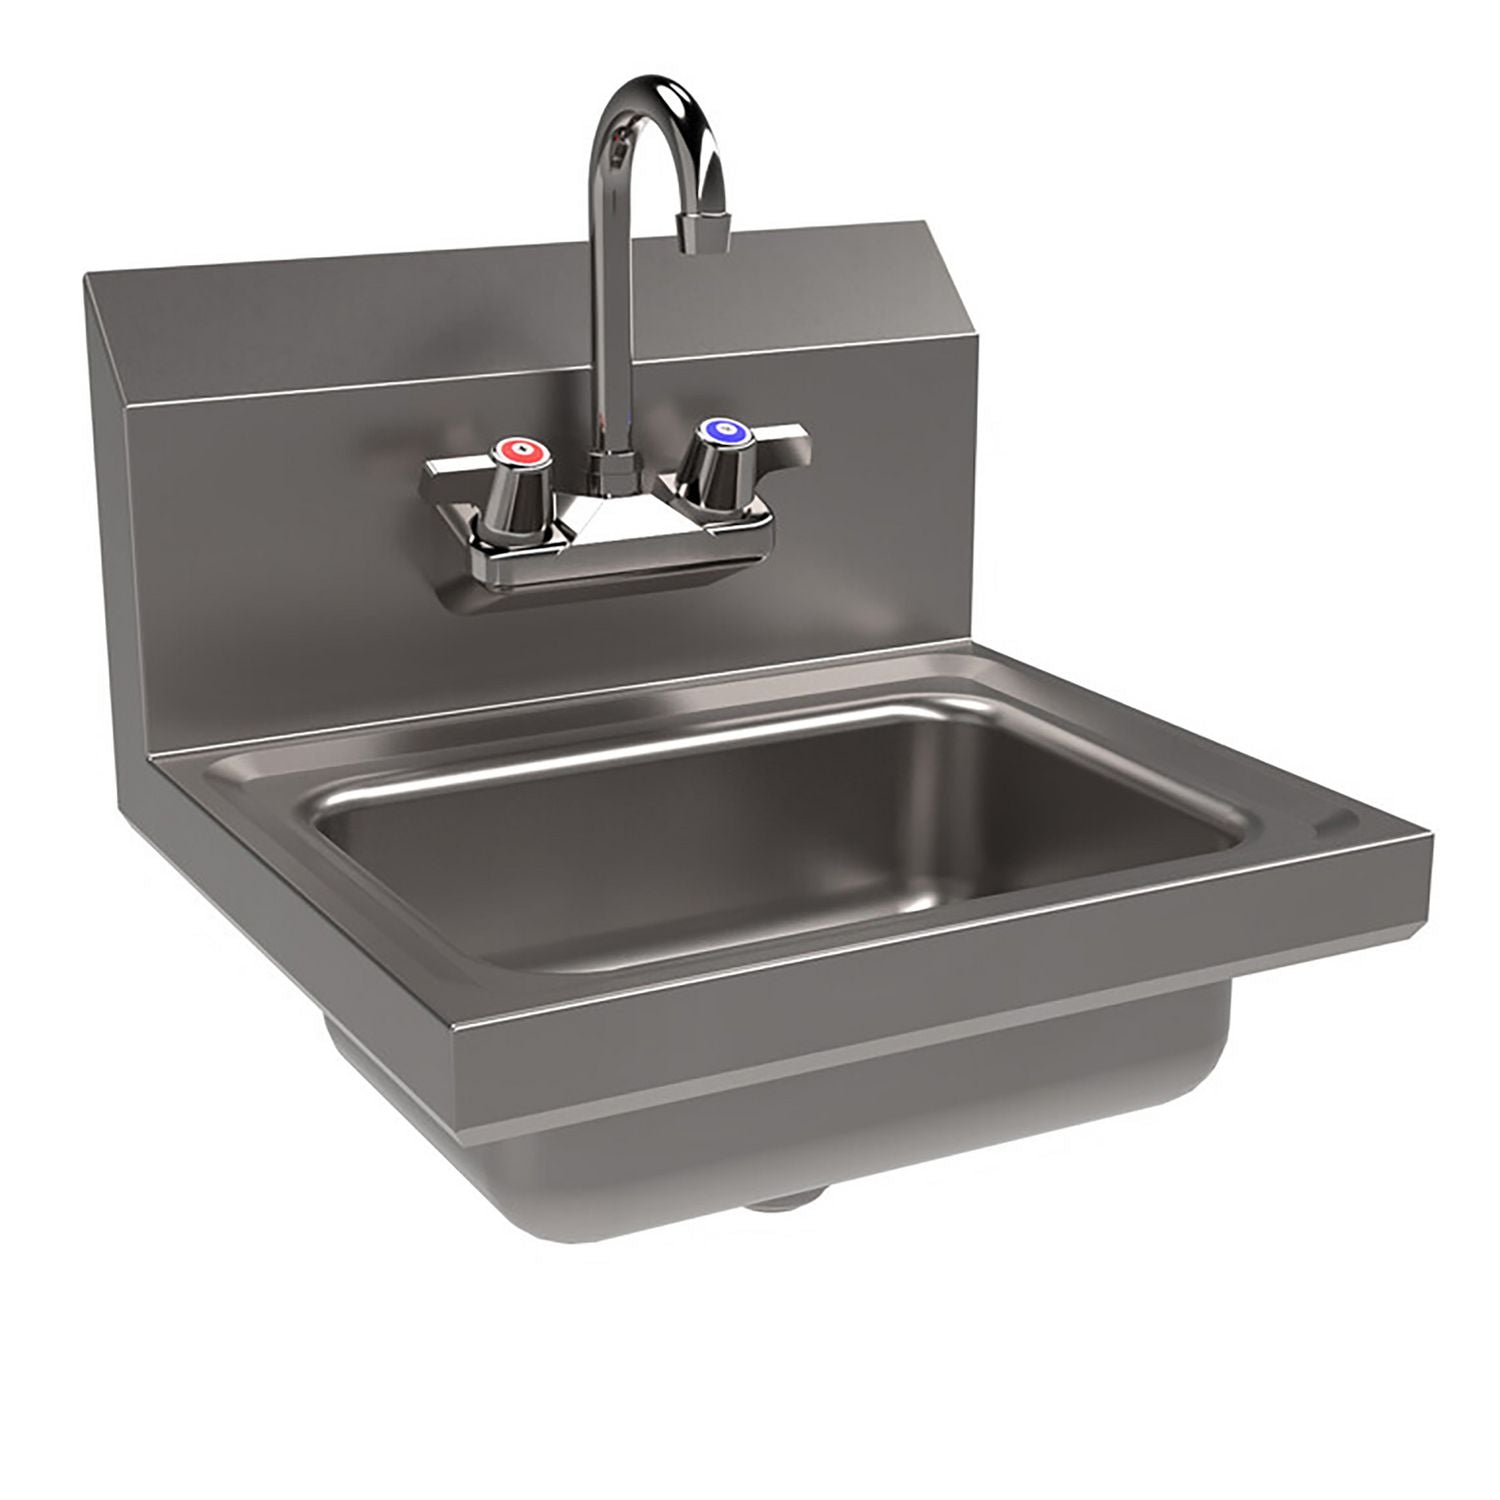 stainless-steel-hand-sink-with-faucet-14-l-x-10-w-x-5-d-ships-in-4-6-business-days_bkebkhsw1410pg - 2